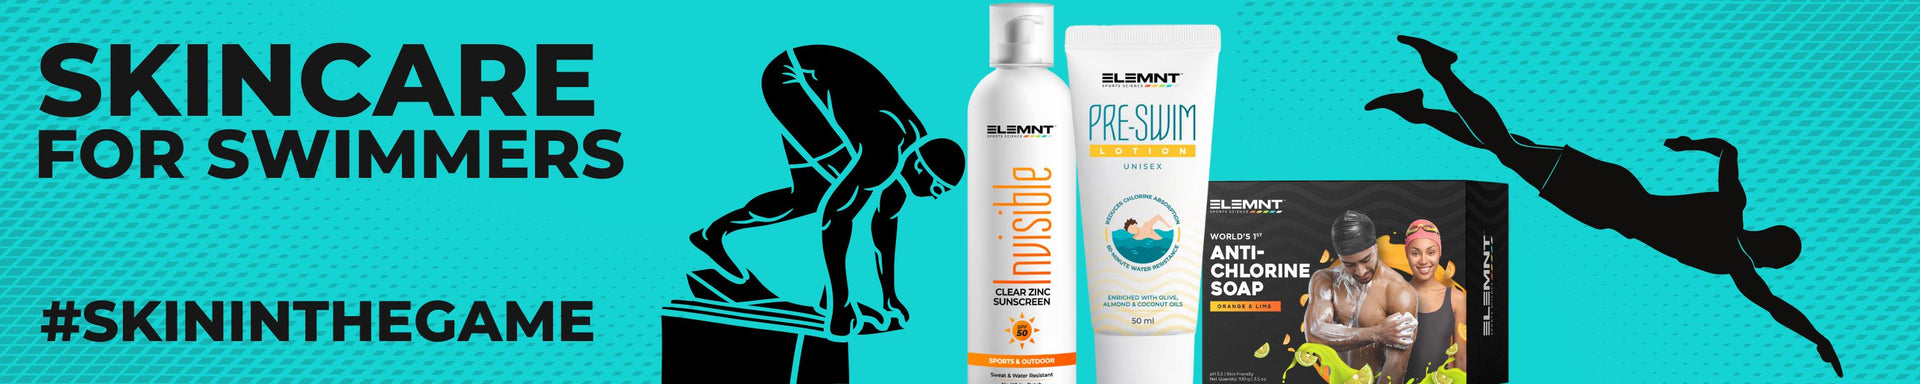 skincare for swimmers